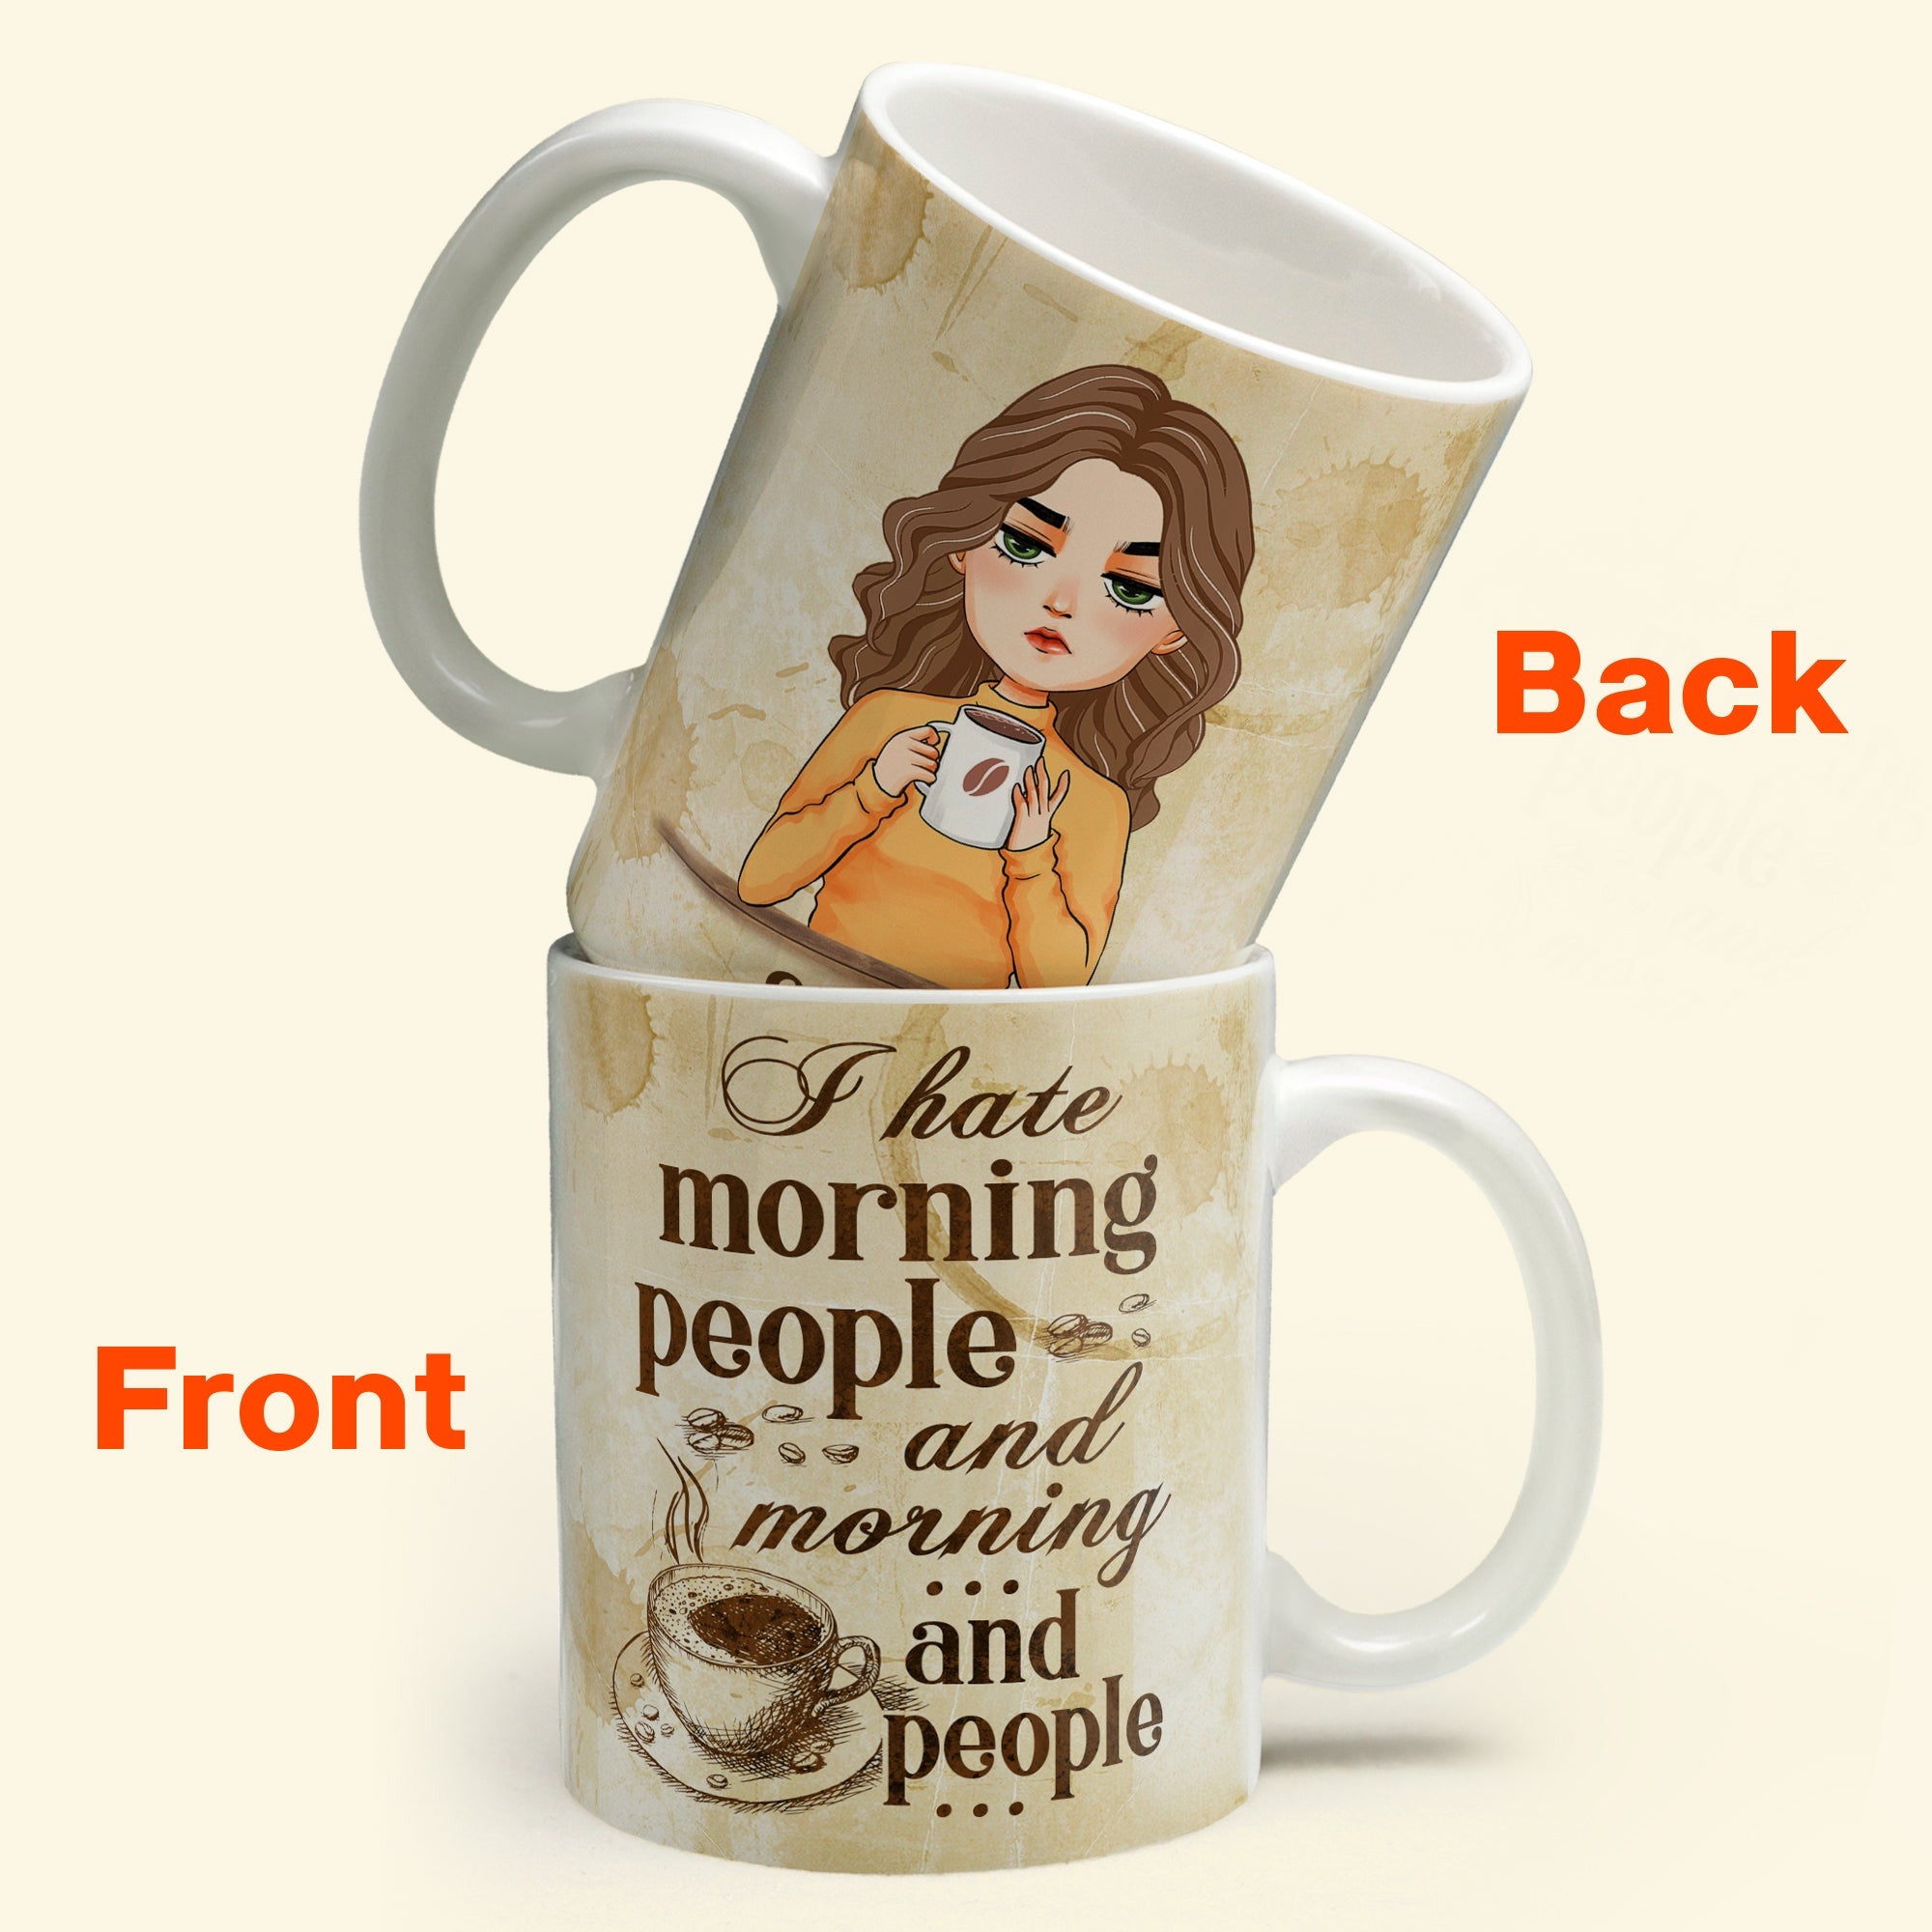 Hate Morning People - Personalized Mug - Birthday Gift For Coffee Lover - Coffee Girl